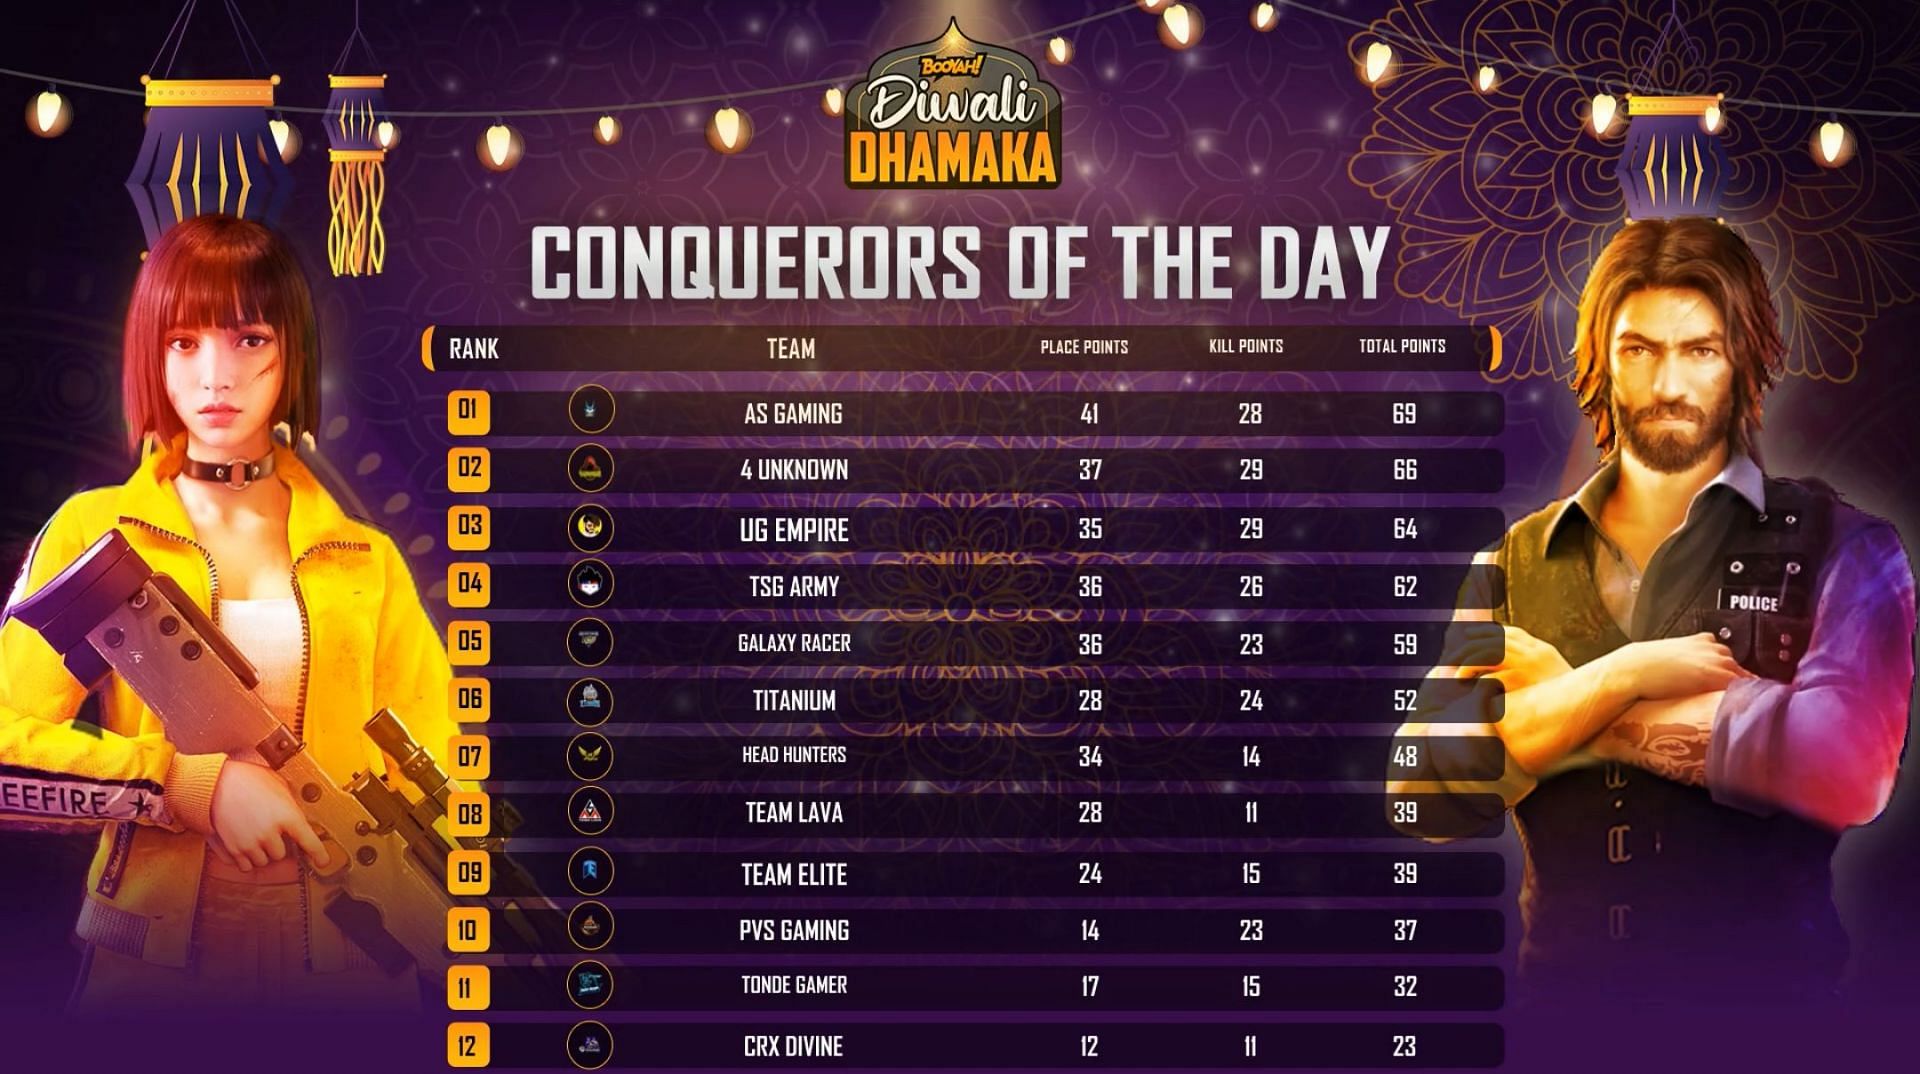 Overall standings of Free Fire Diwali Dhamaka day 2 (Image via Booyah)